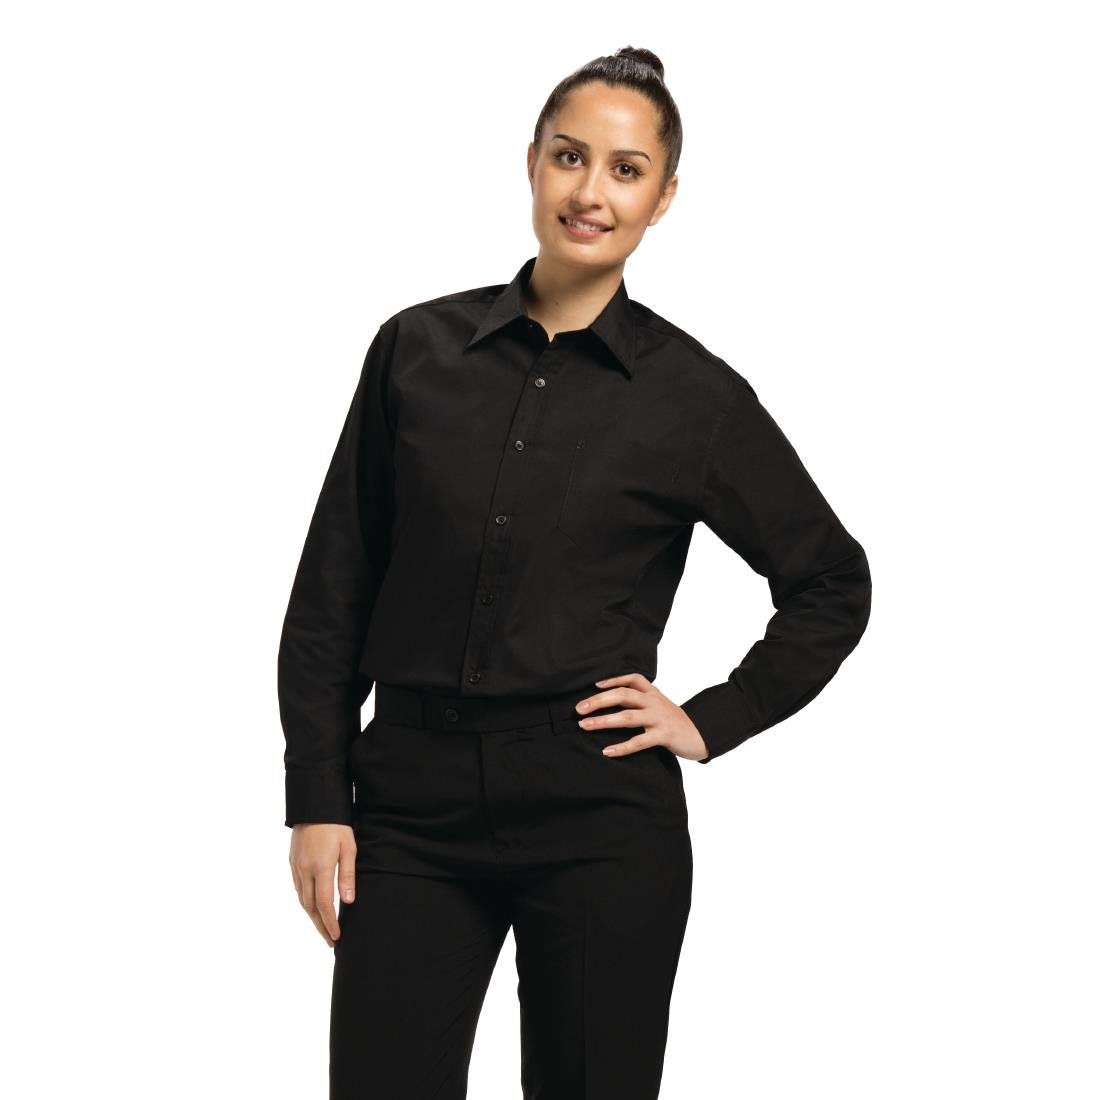 A798-S Chef Works Unisex Long Sleeve Dress Shirt Black S JD Catering Equipment Solutions Ltd